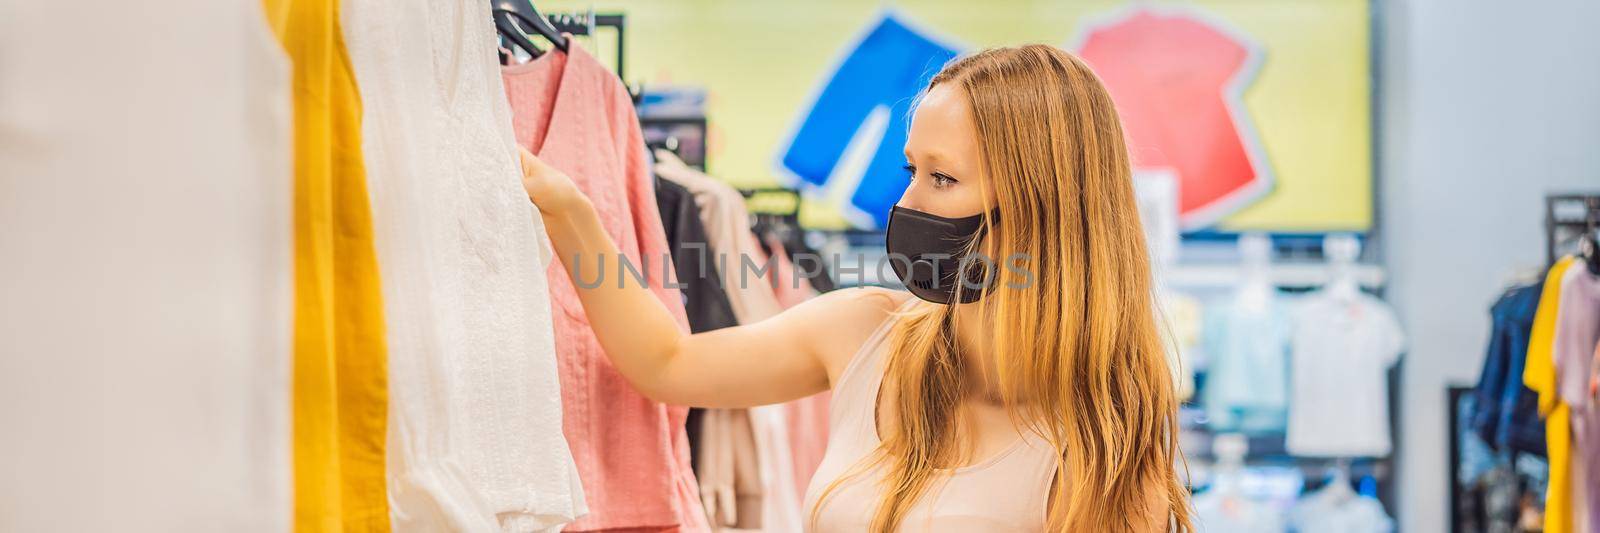 Woman in a clothing store in a medical mask because of a coronovirus. Quarantine is over, now you can go to the clothing store BANNER, LONG FORMAT by galitskaya